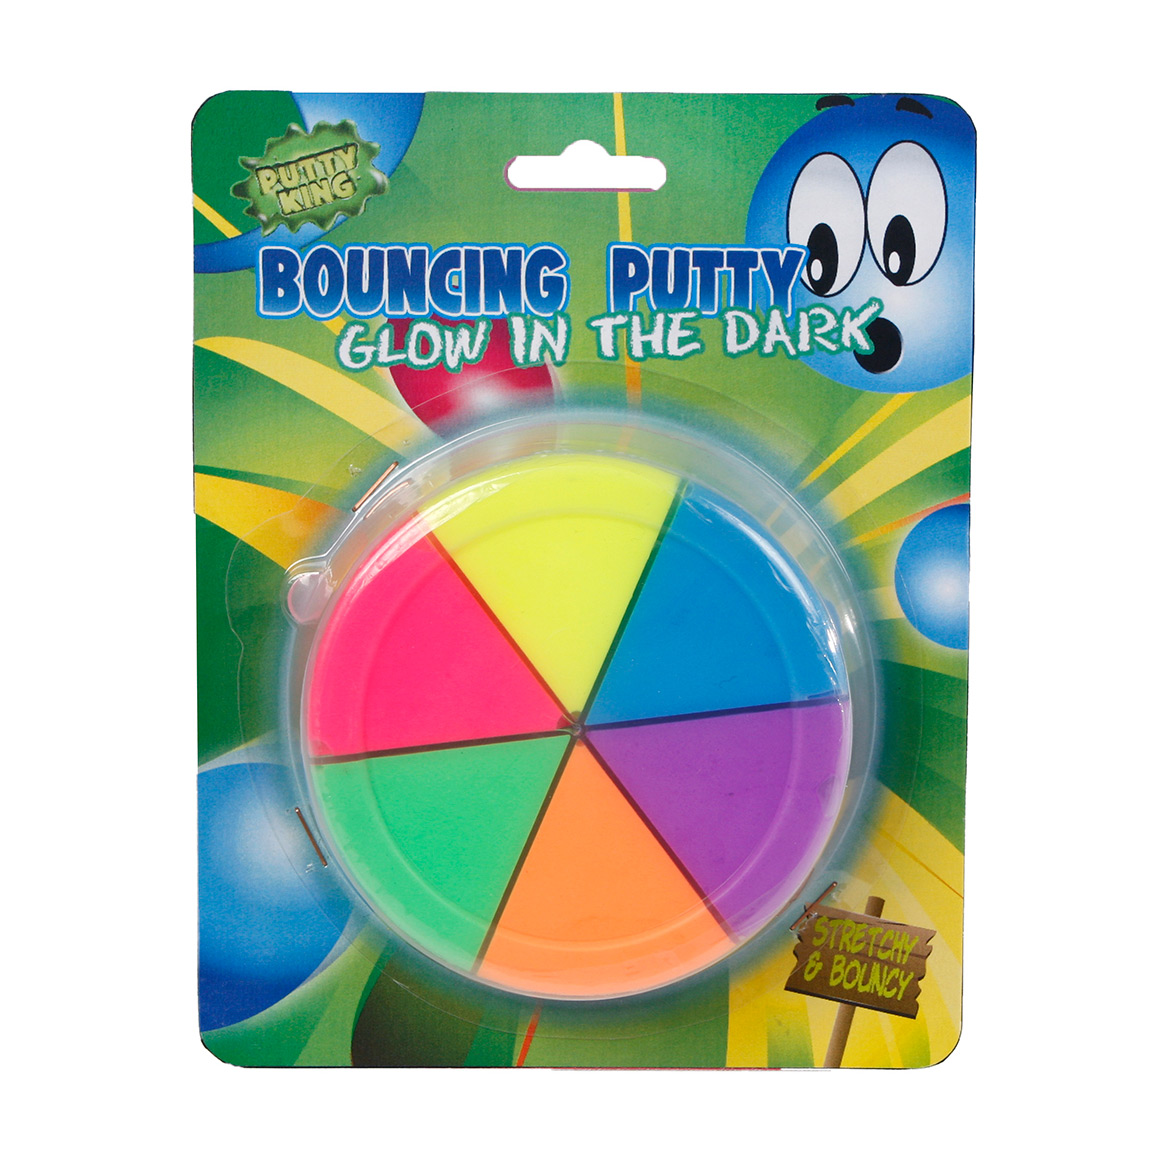 Glow in the Dark Bouncing Putty